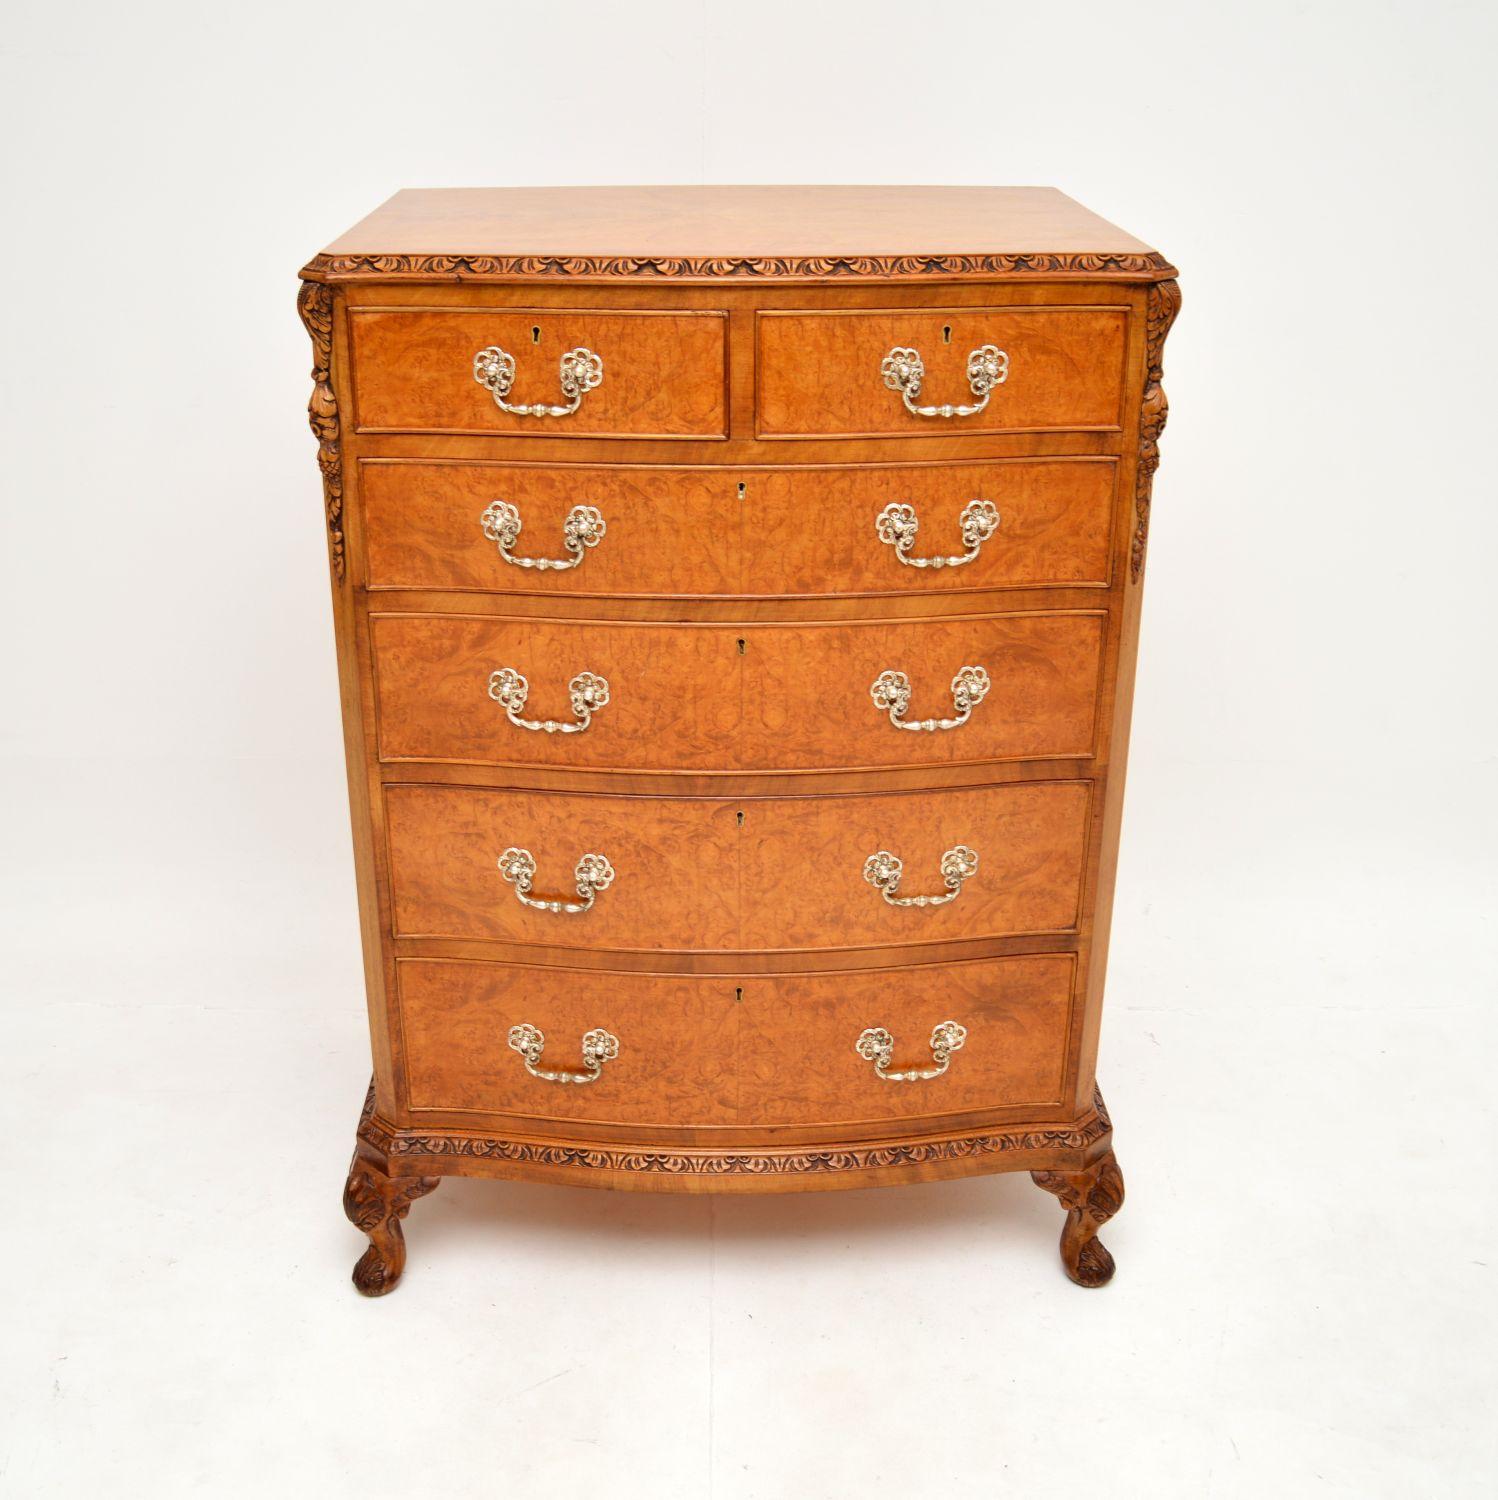 A stunning antique burr walnut chest of drawers of the highest order. This was made in England by Maples, it dates from around the 1920’s period.

It is of extremely fine quality, this is beautifully made with exceptional burr walnut grain patterns